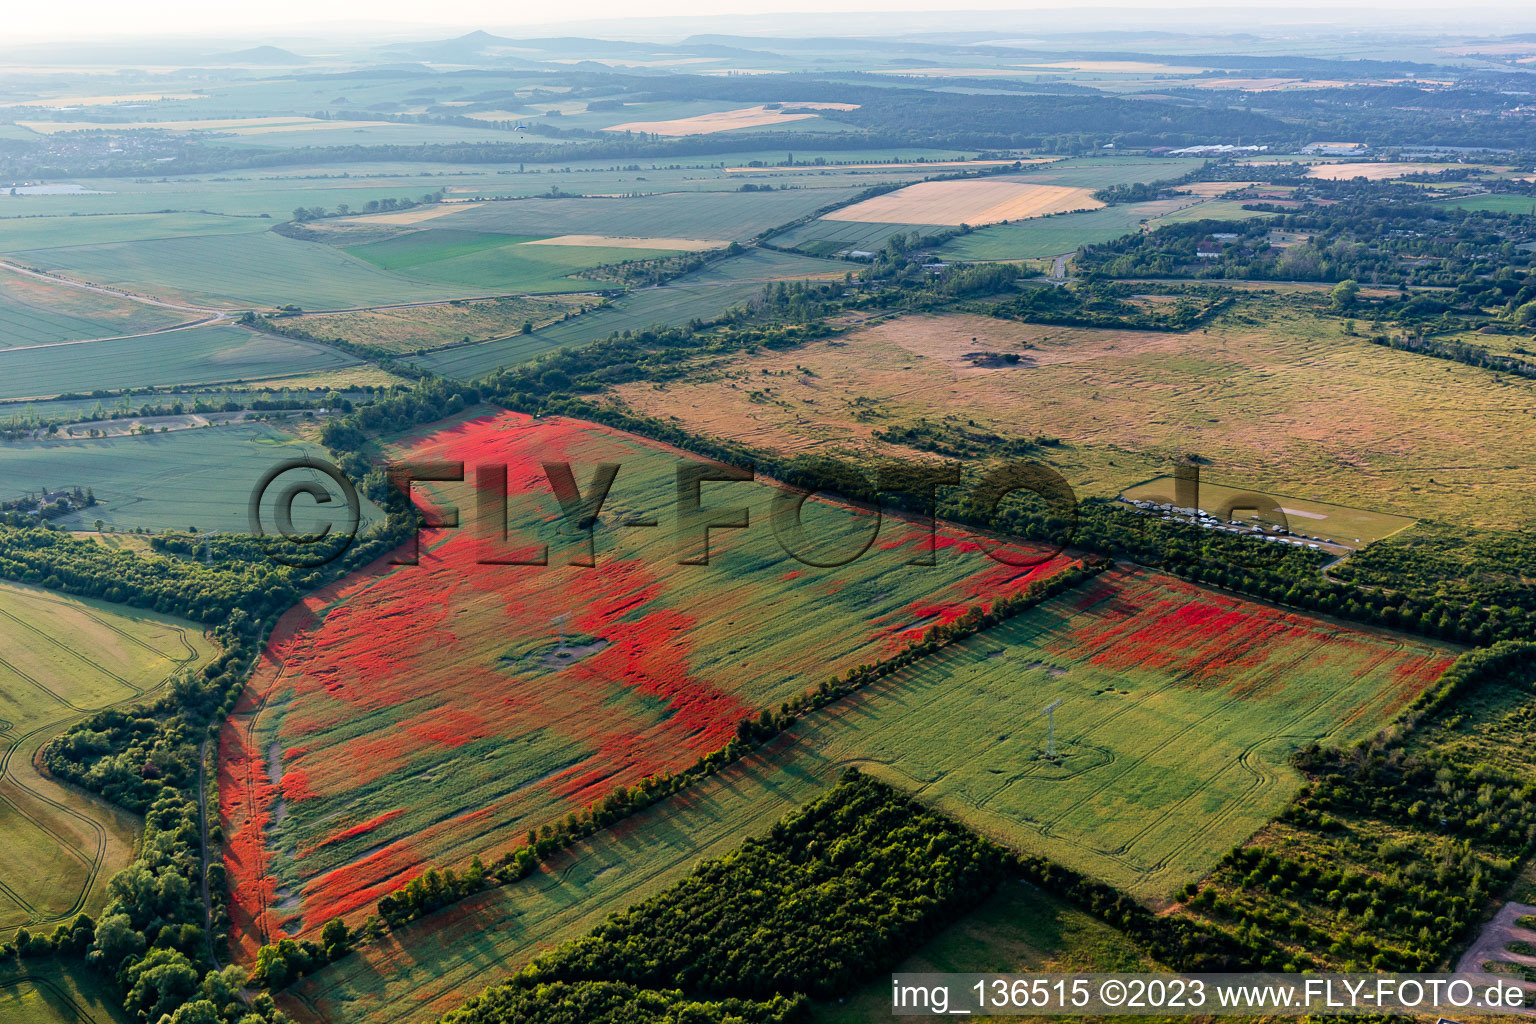 Corn poppies in cornfields in the district Gernrode in Quedlinburg in the state Saxony-Anhalt, Germany from above